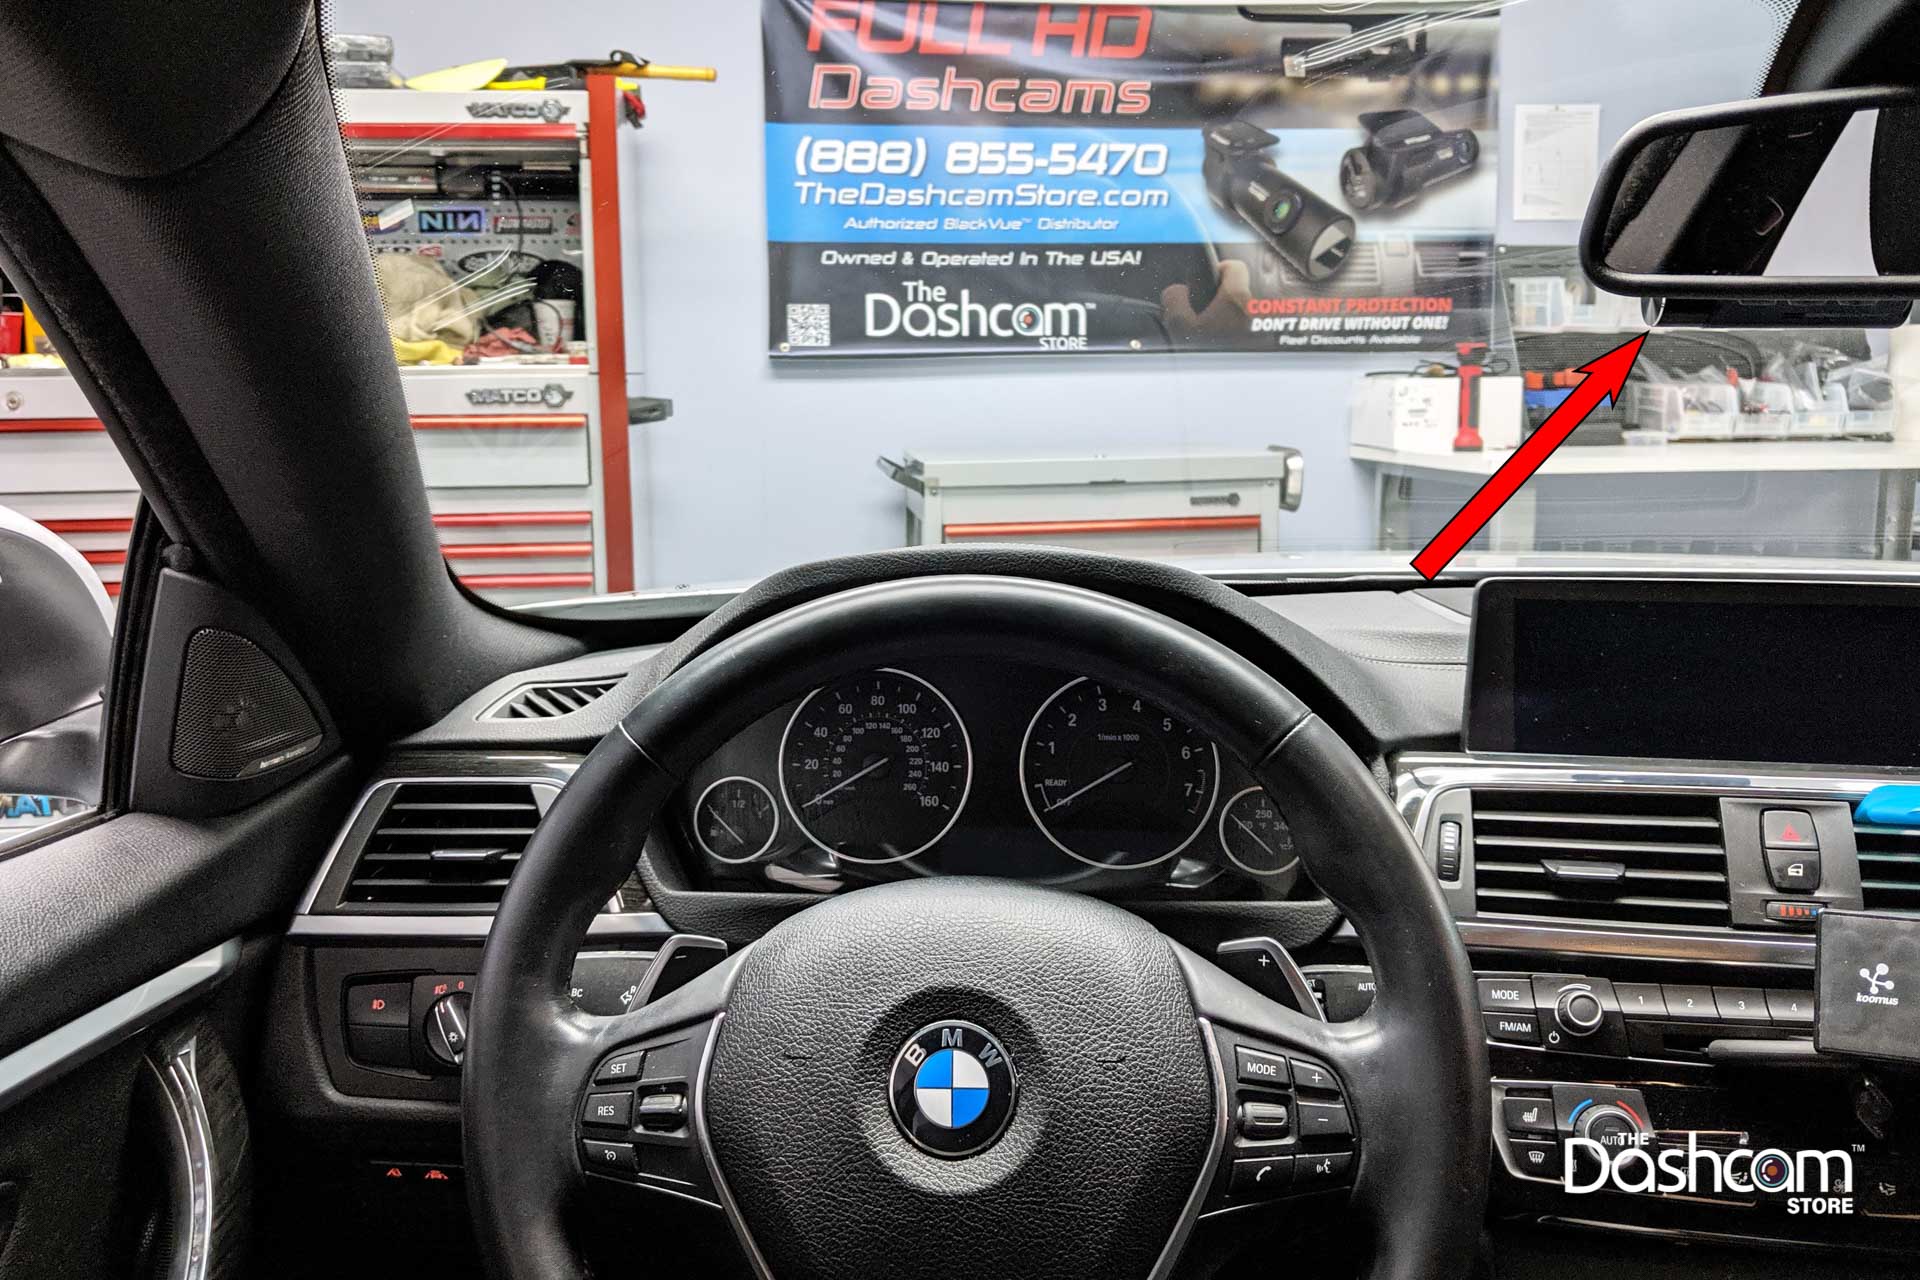 https://www.thedashcamstore.com/content/2019-BMW-440i-Thinkware-Q800-Pro/full-size/thedashcamstore.com-thinkware-q800-pro-dashcam-installed-bmw-440i-6.jpg